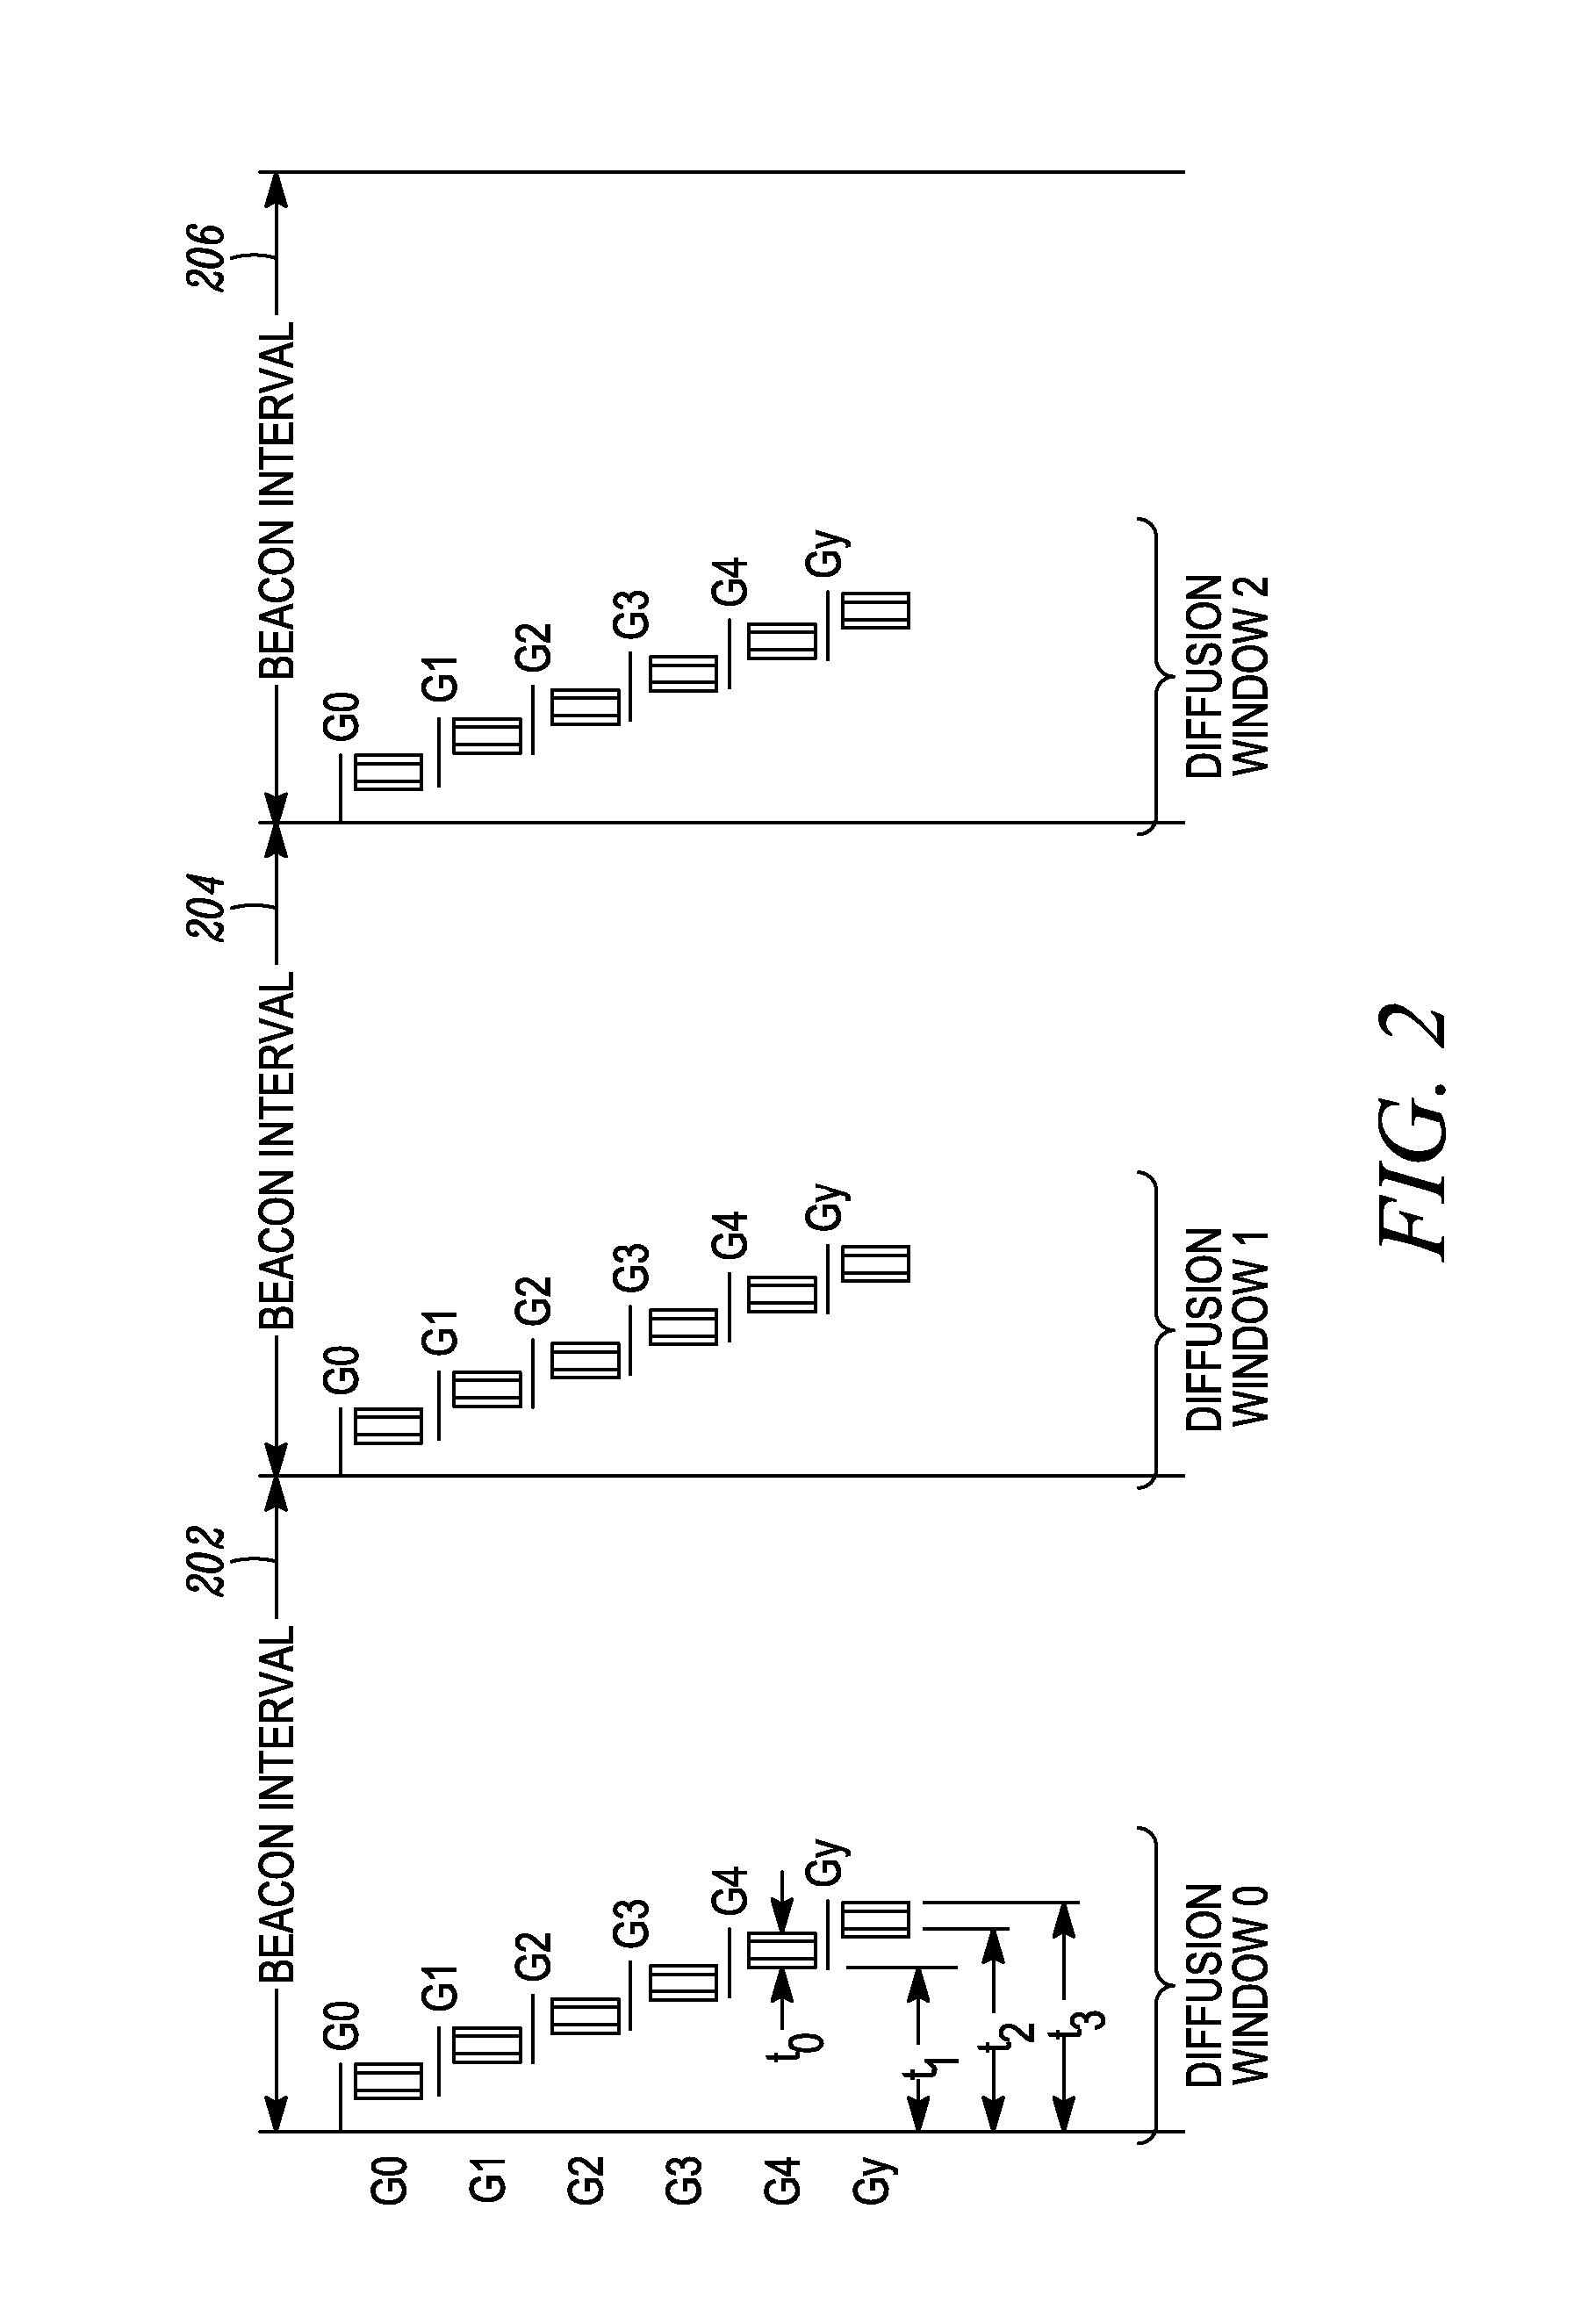 Method and apparatus for tracking a channel timing message and supporting channel scanning in a digital mobile radio system